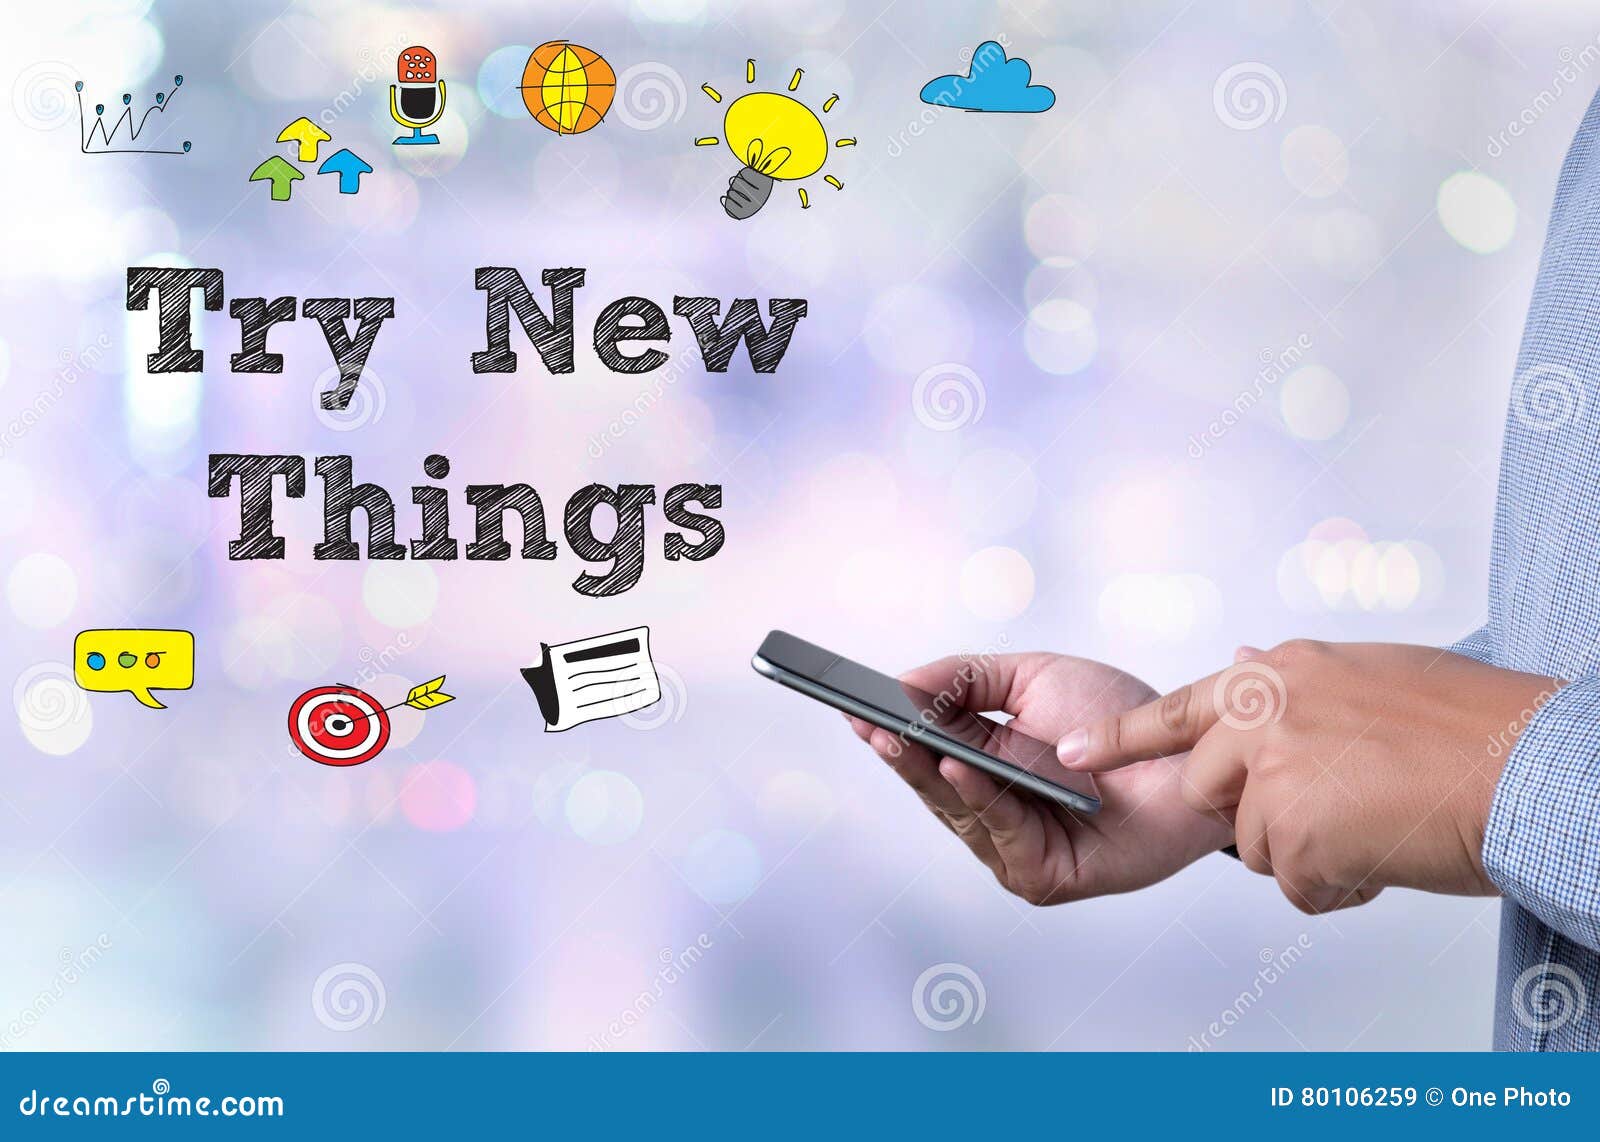 Just try new. Try New things. Try it Now.